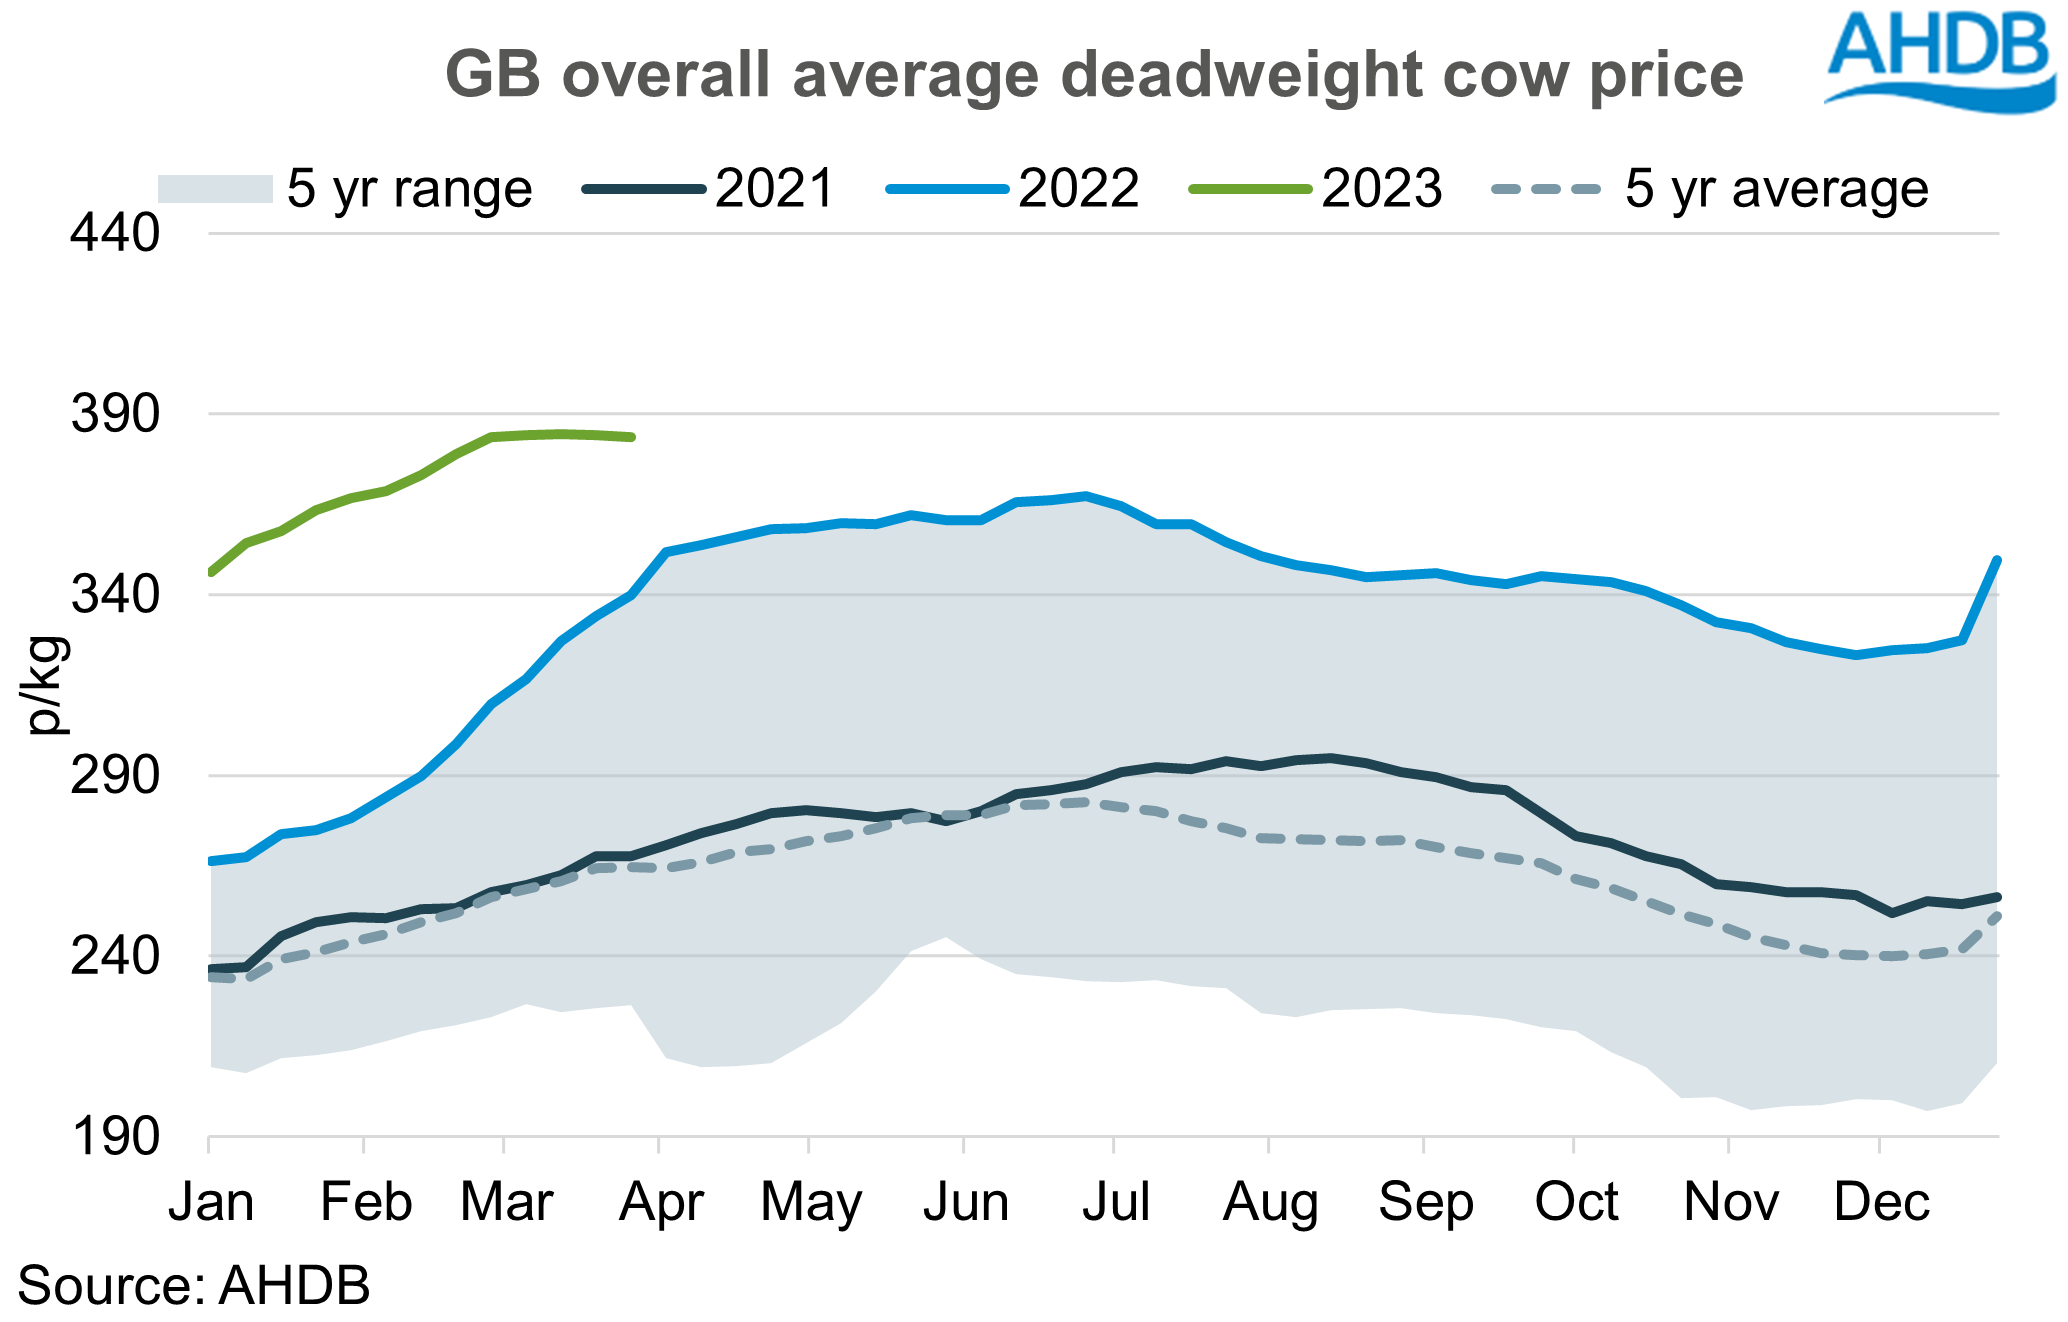 Prime cattle prices continue to march on upwards AHDB